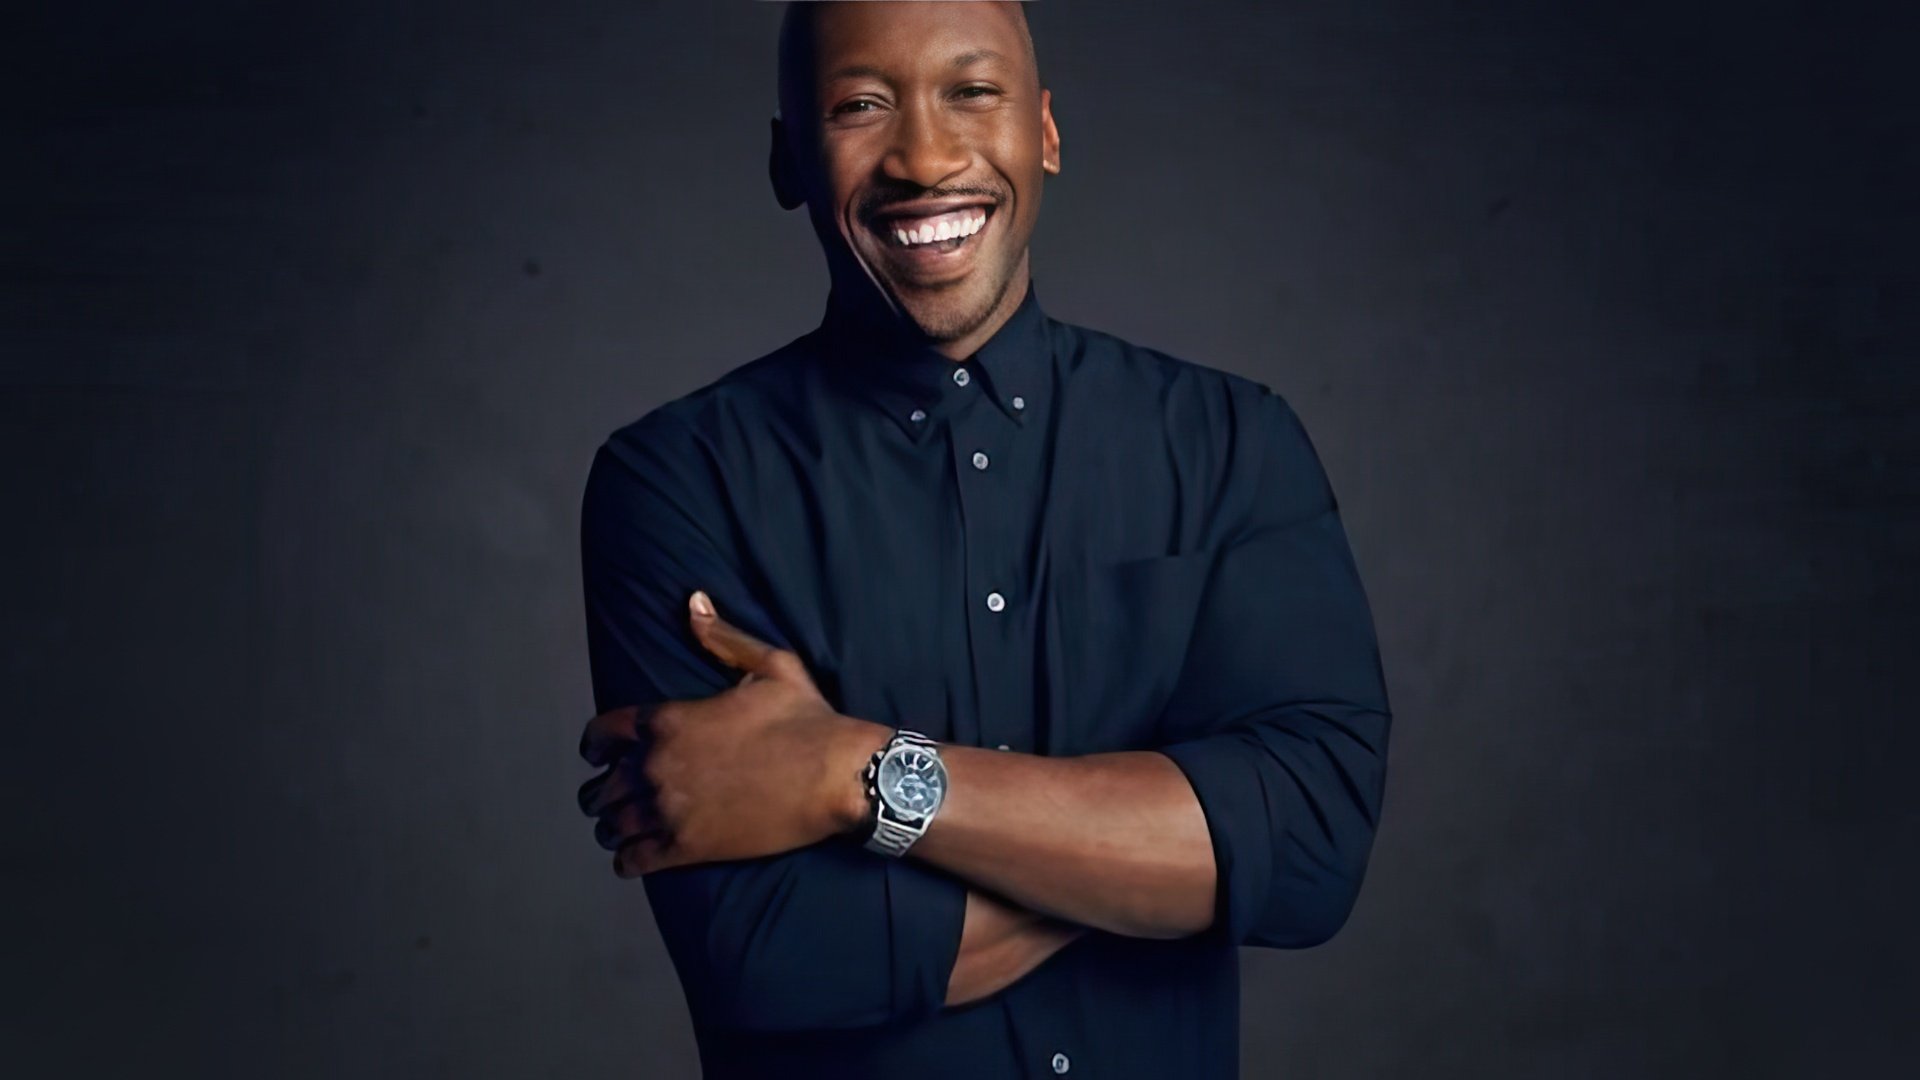 Mahershala Ali Decided to Follow in His Father’s Footsteps